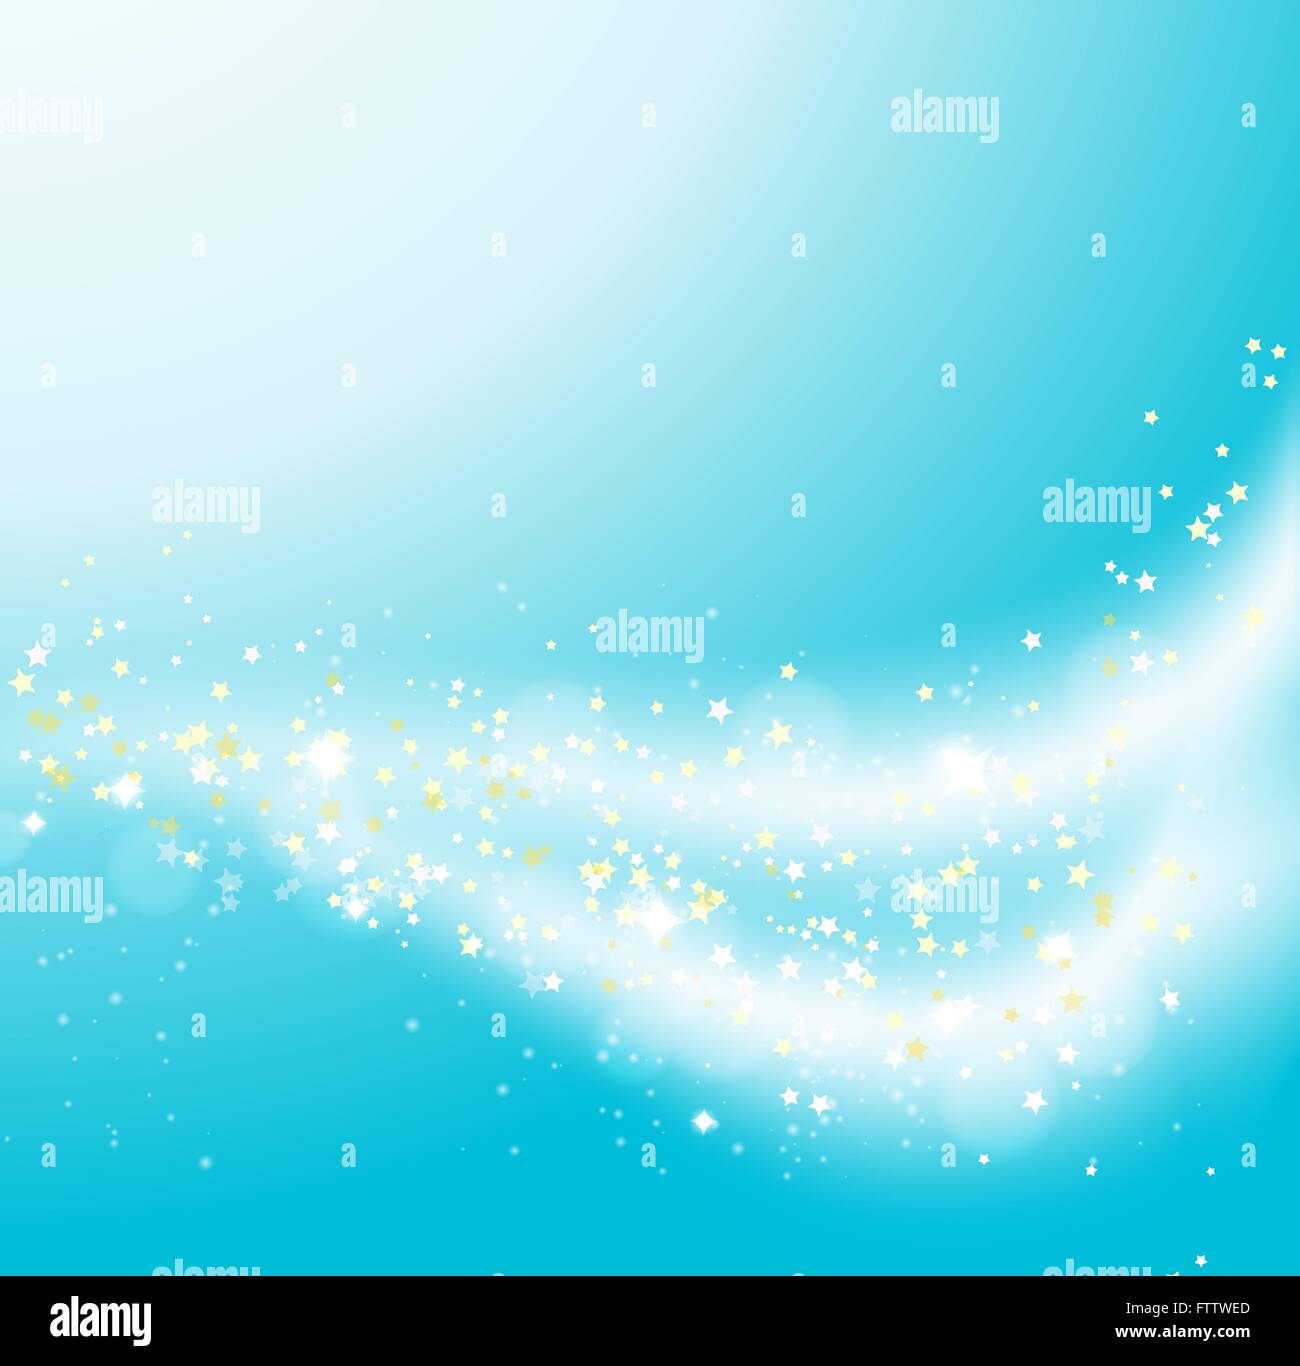 flowing stars abstract background. aqua blue background with glittering particles flowing in waves. vector illustration Stock Vector